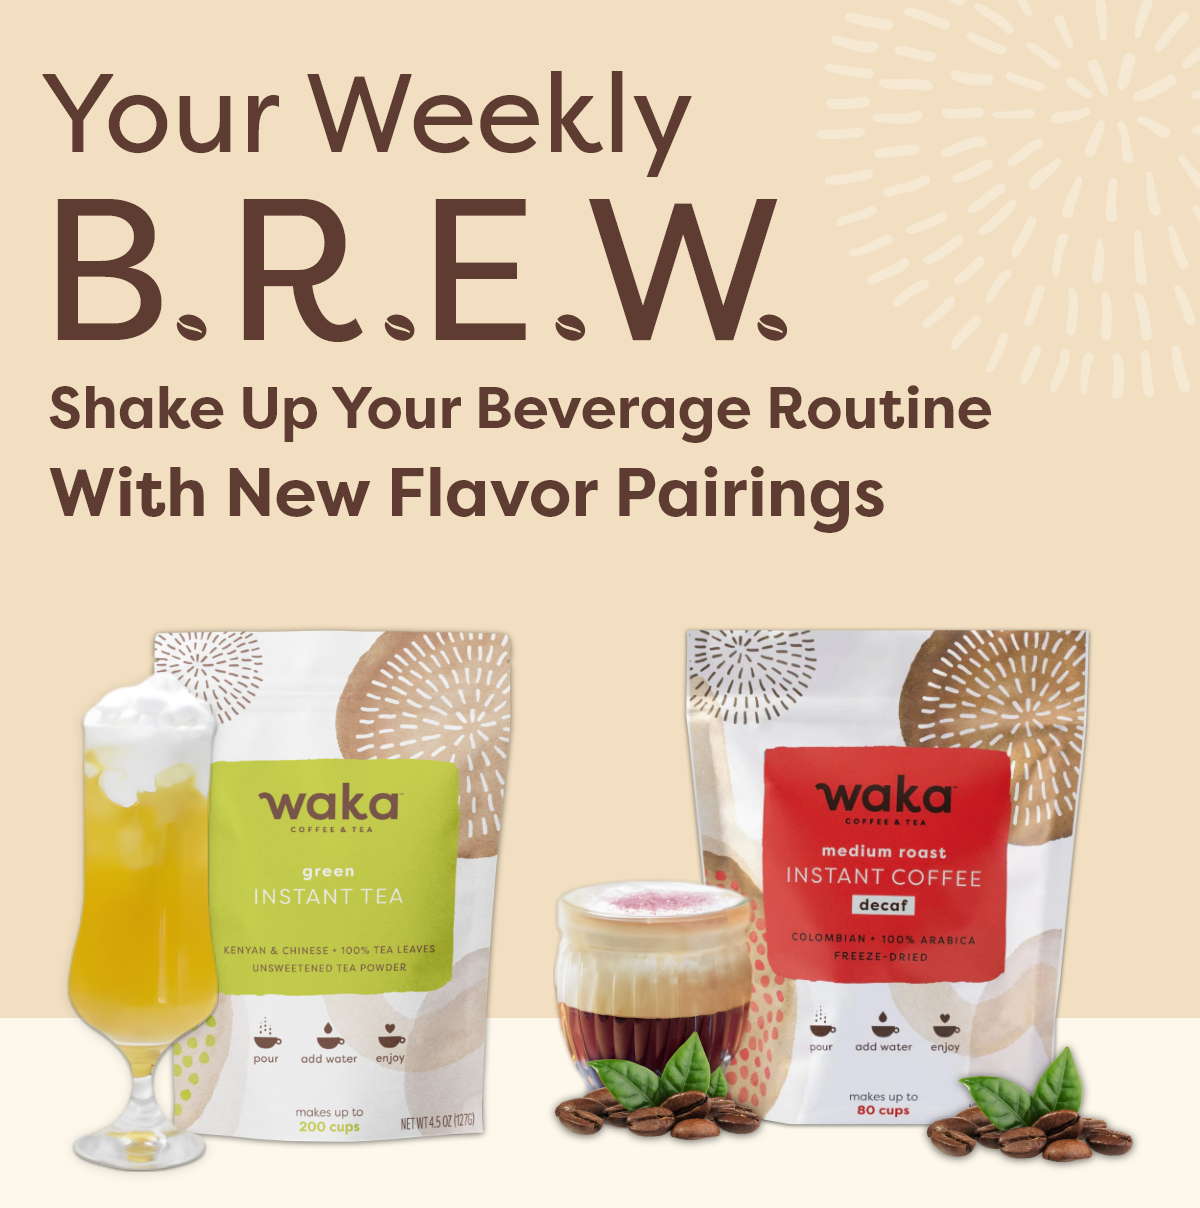 Your Weekly B.R.E.W.  Shake Up Your Beverage Routine with New Flavor Pairings